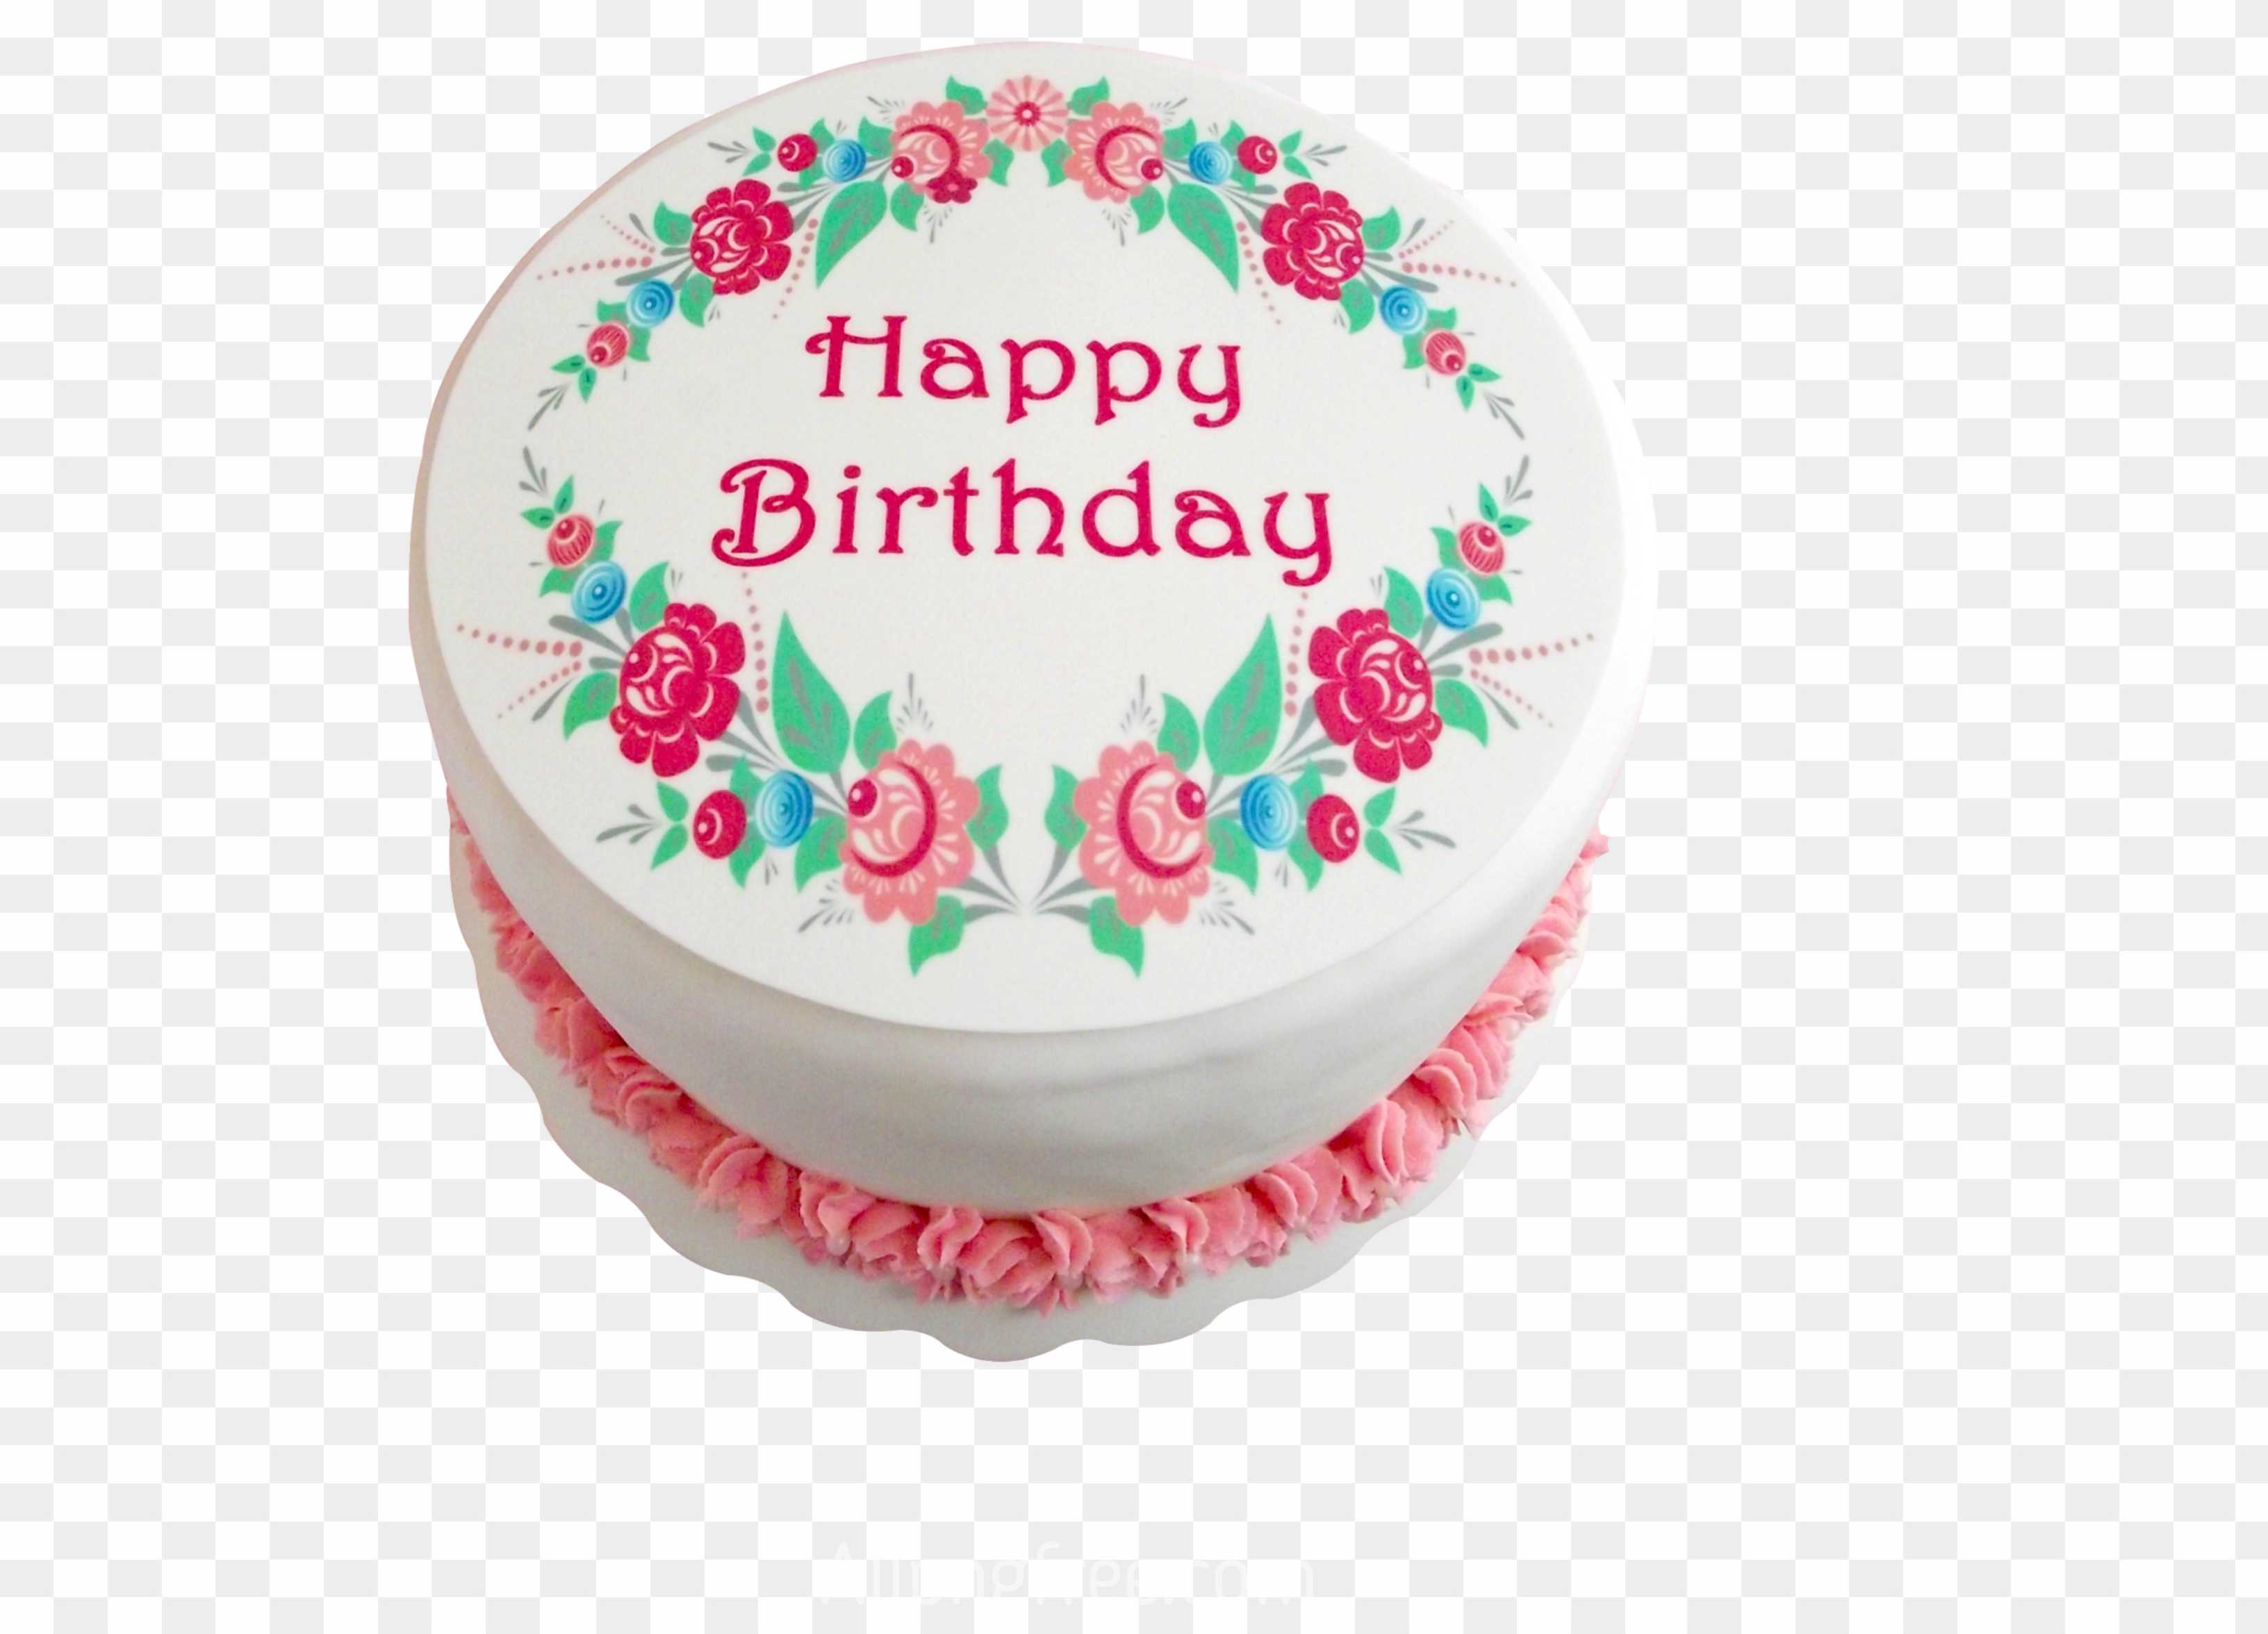 Happy birthday cake PNG images